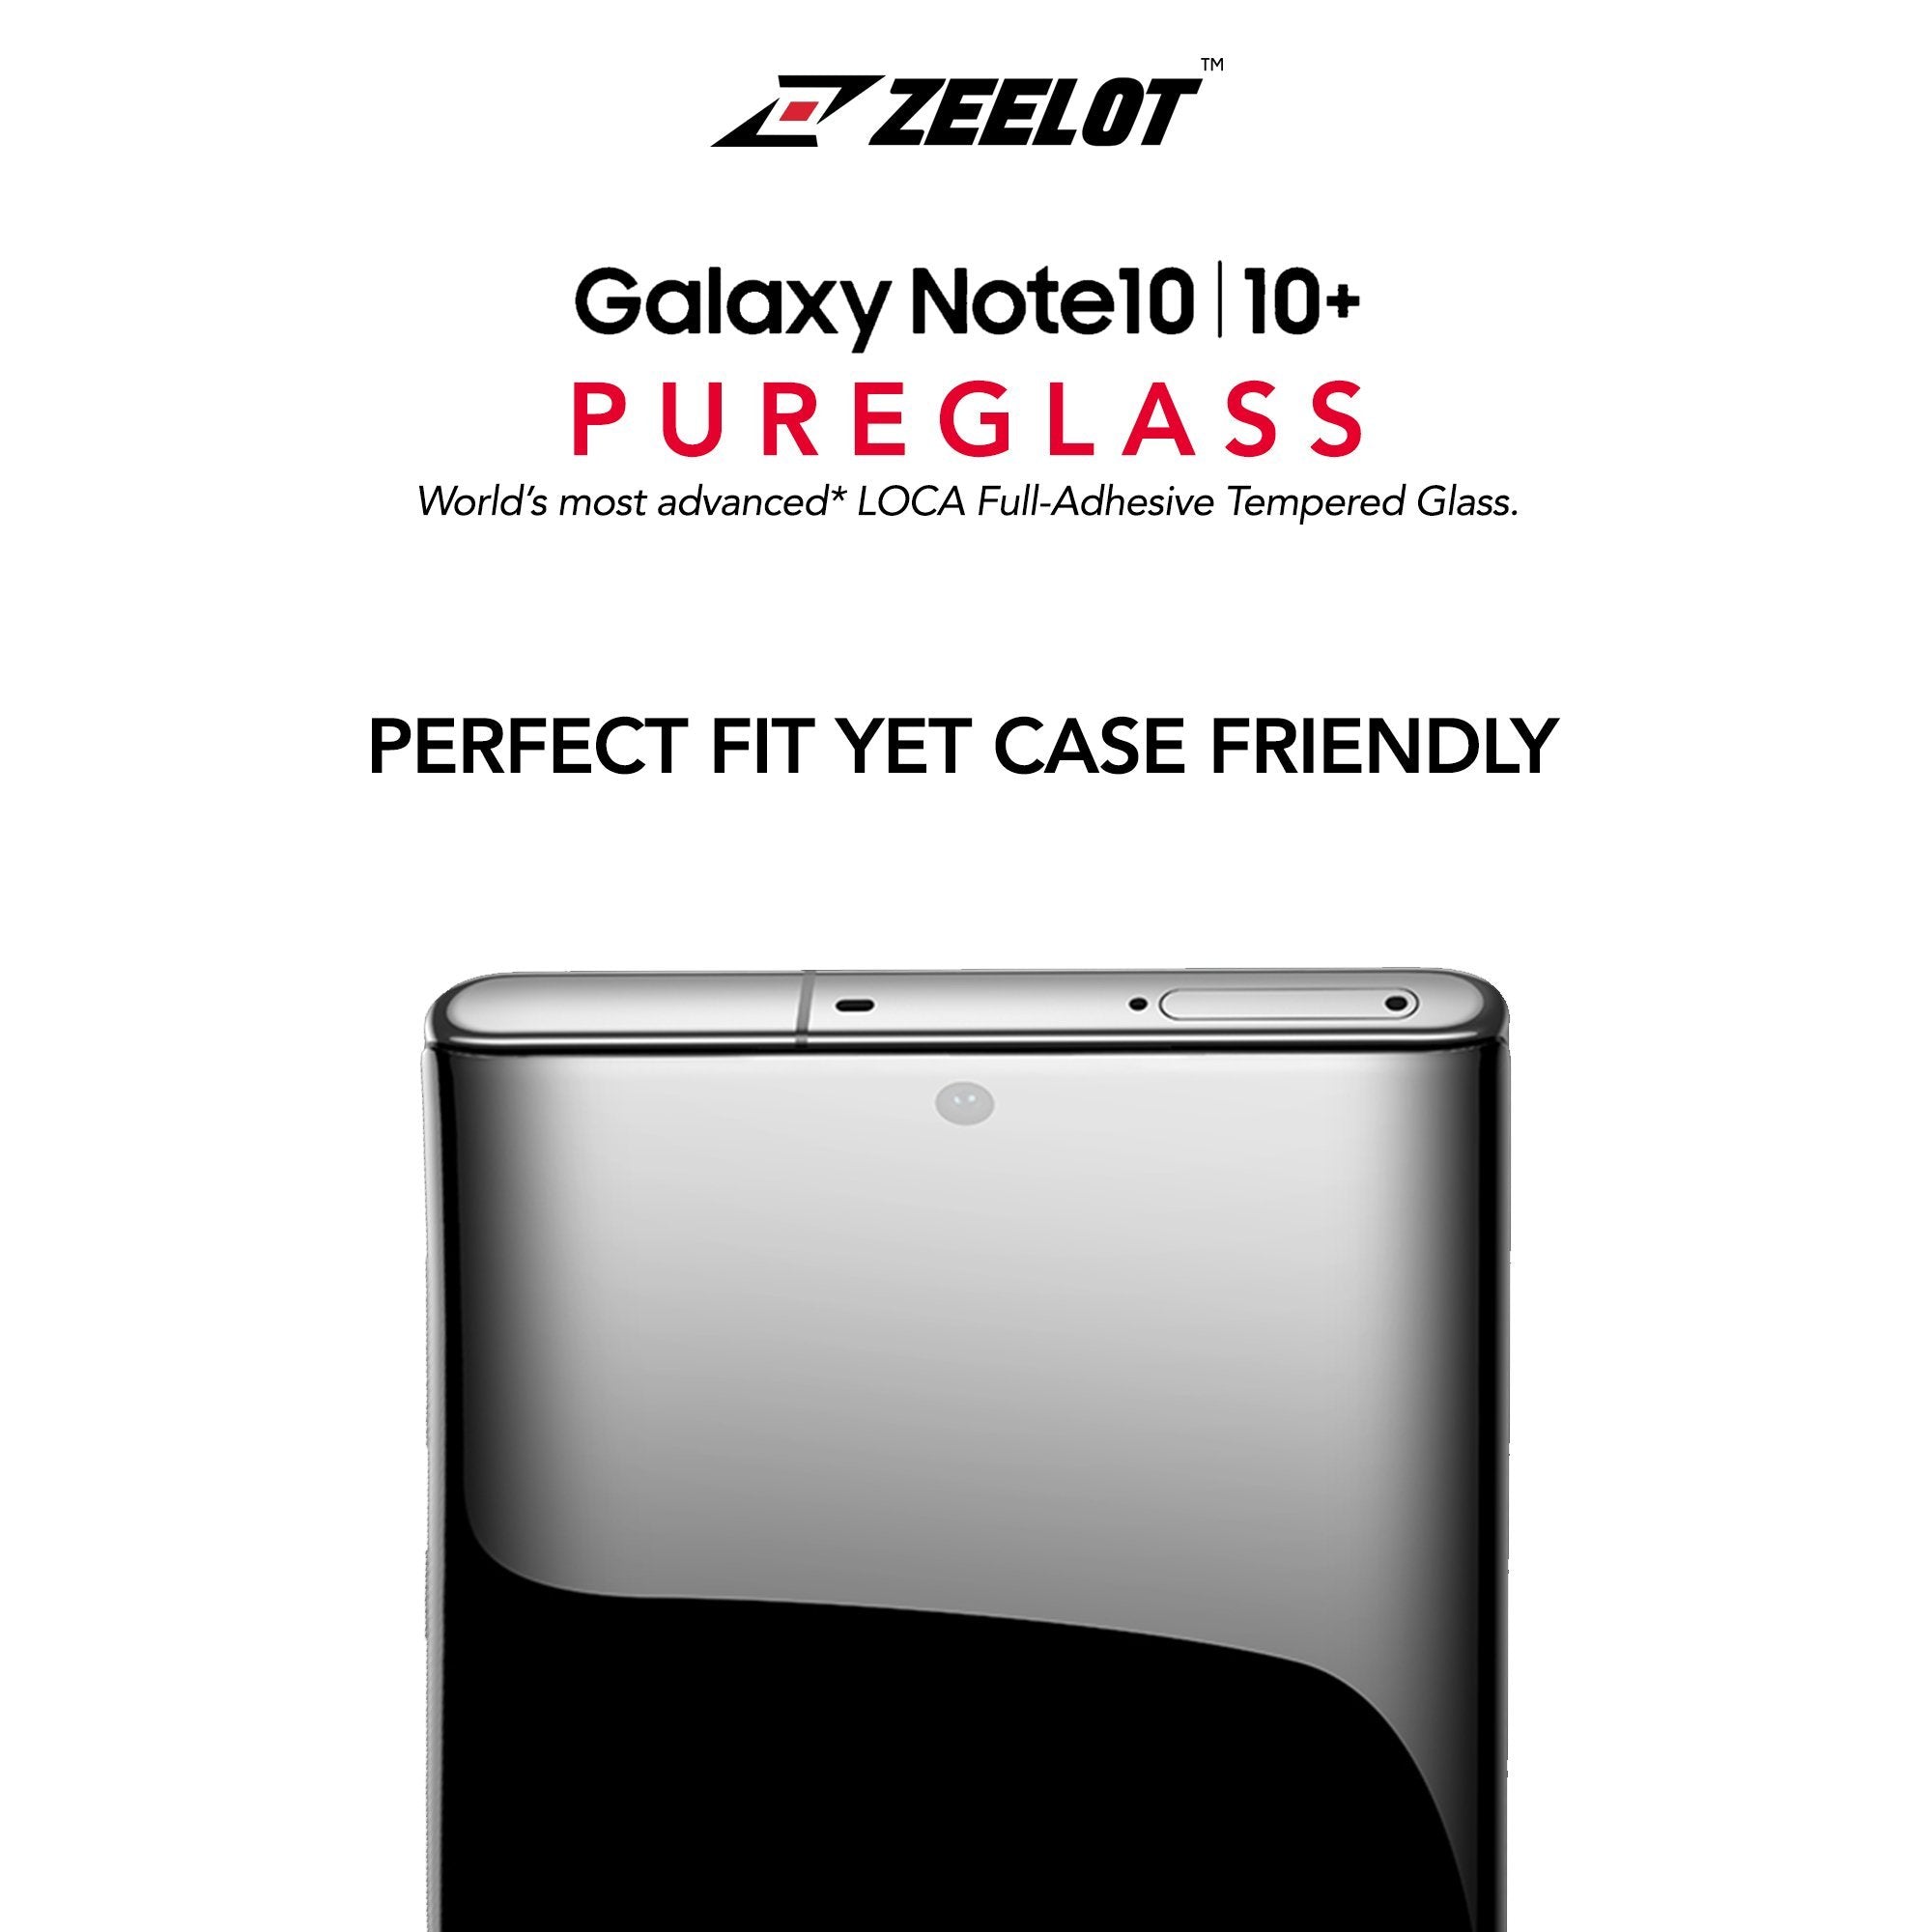 ZEELOT PureGlass 3D LOCA Tempered Glass Screen Protector for Samsung Galaxy Note 10, Anti Blue Ray LOCA Tempered Glass ZEELOT 